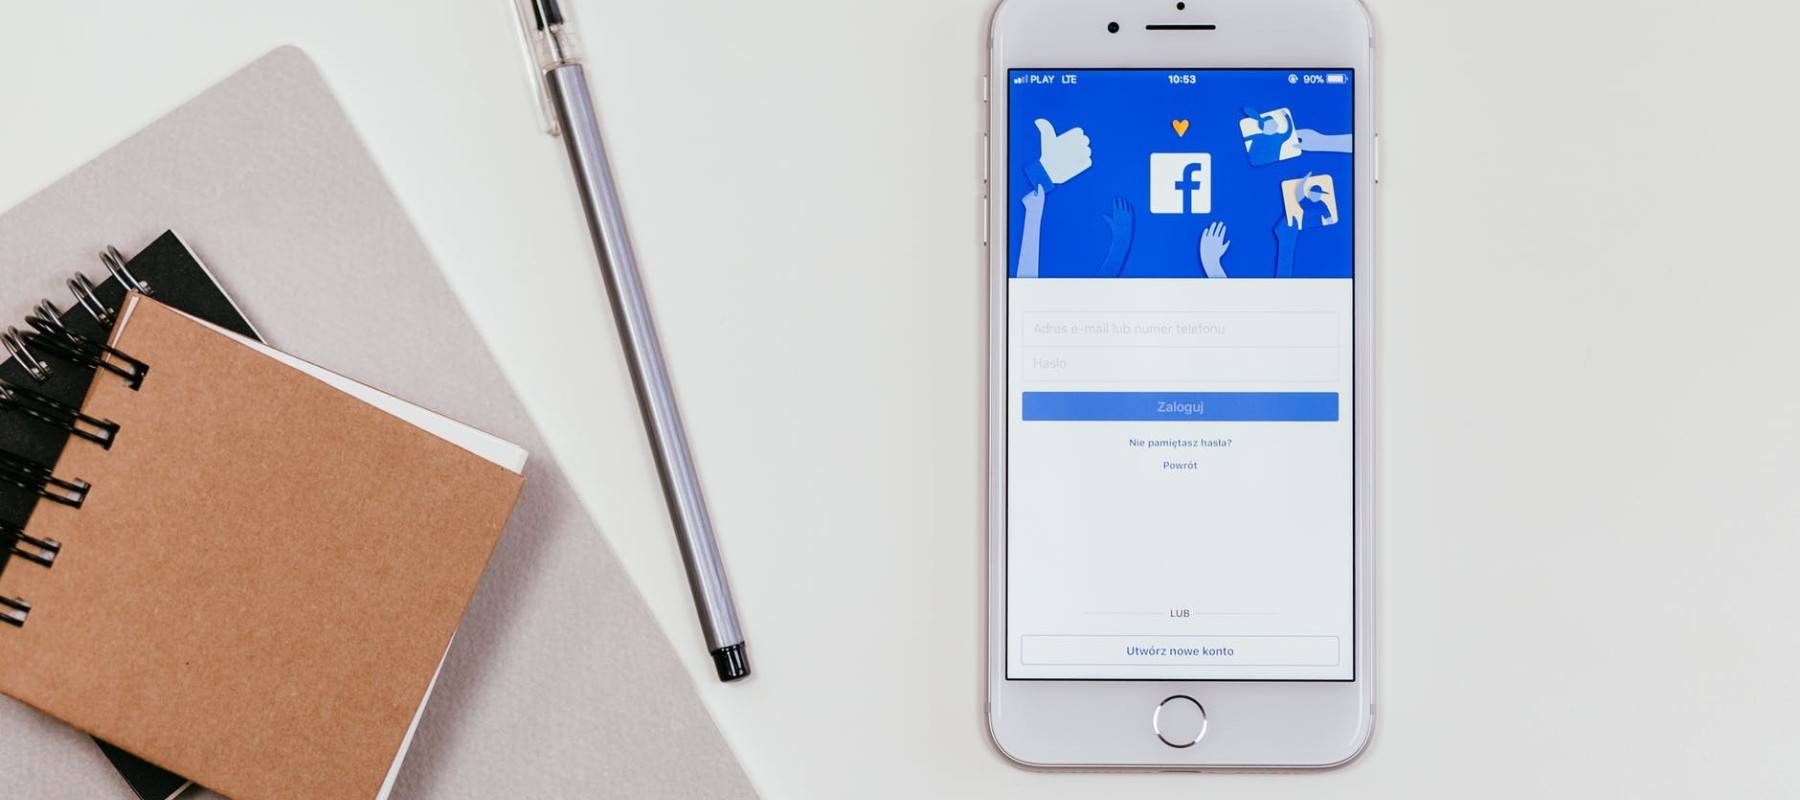 How to professionally manage a Facebook page